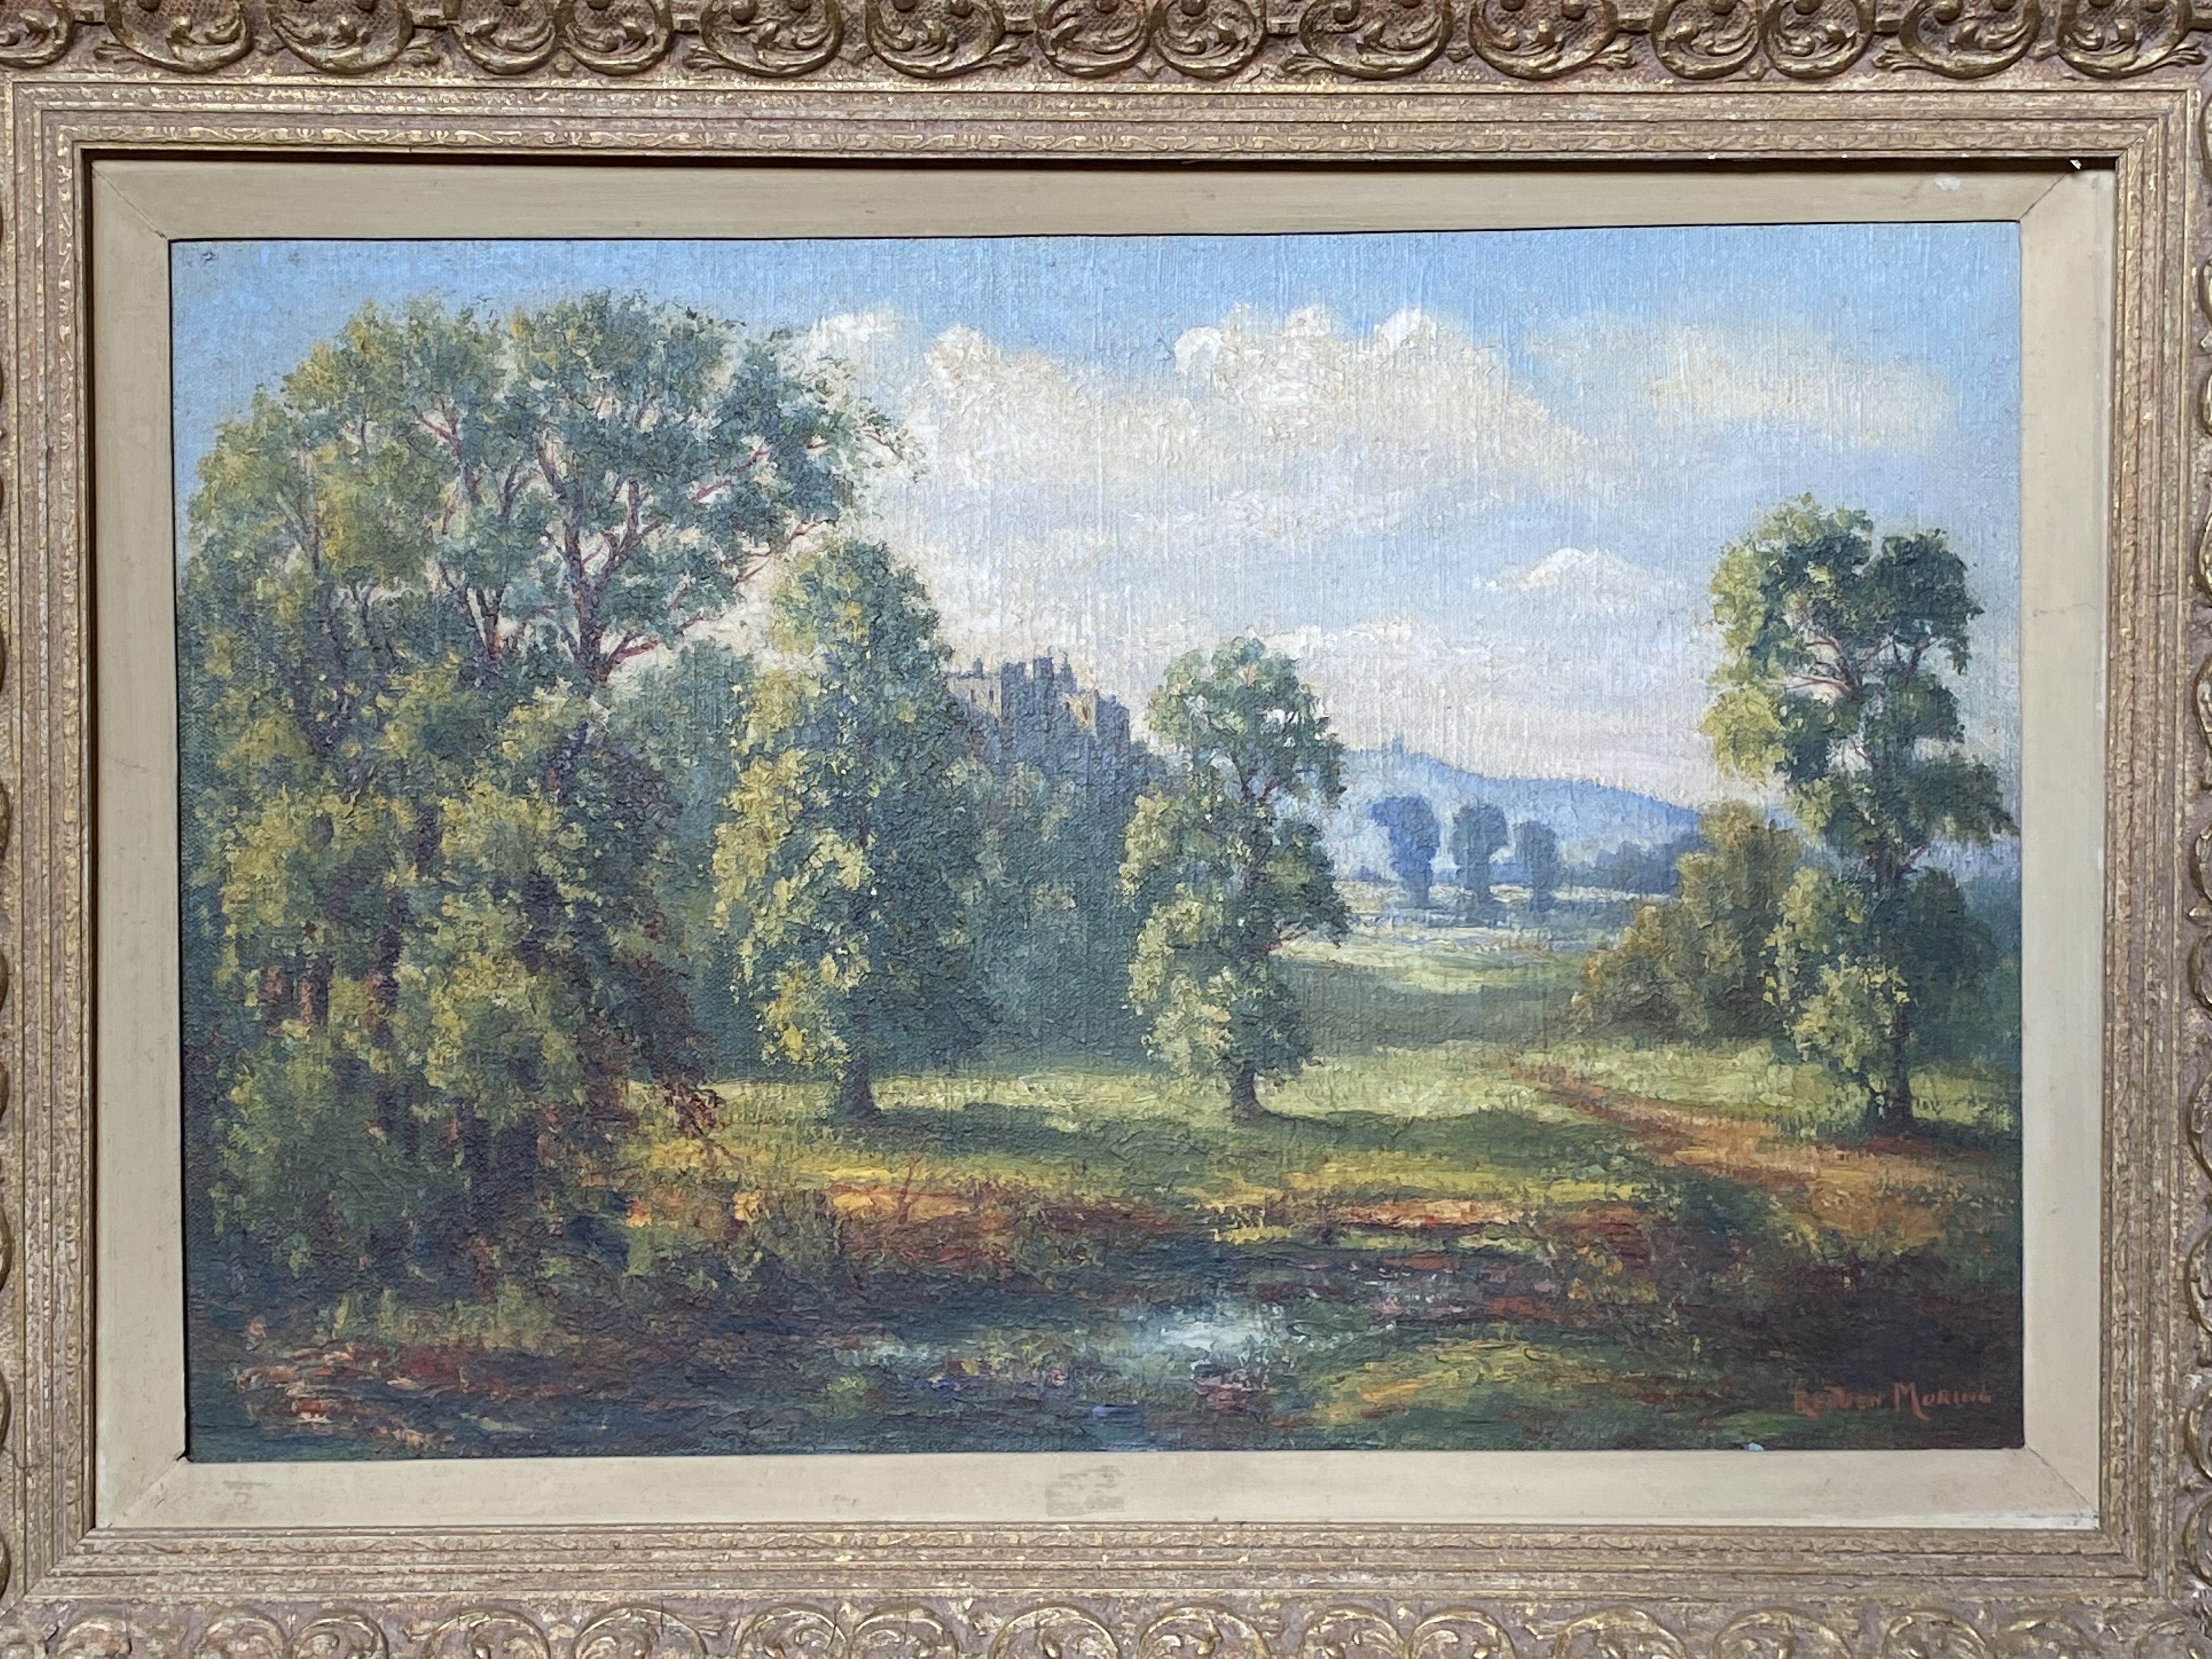 Oil on canvas signed by Reuben Morning